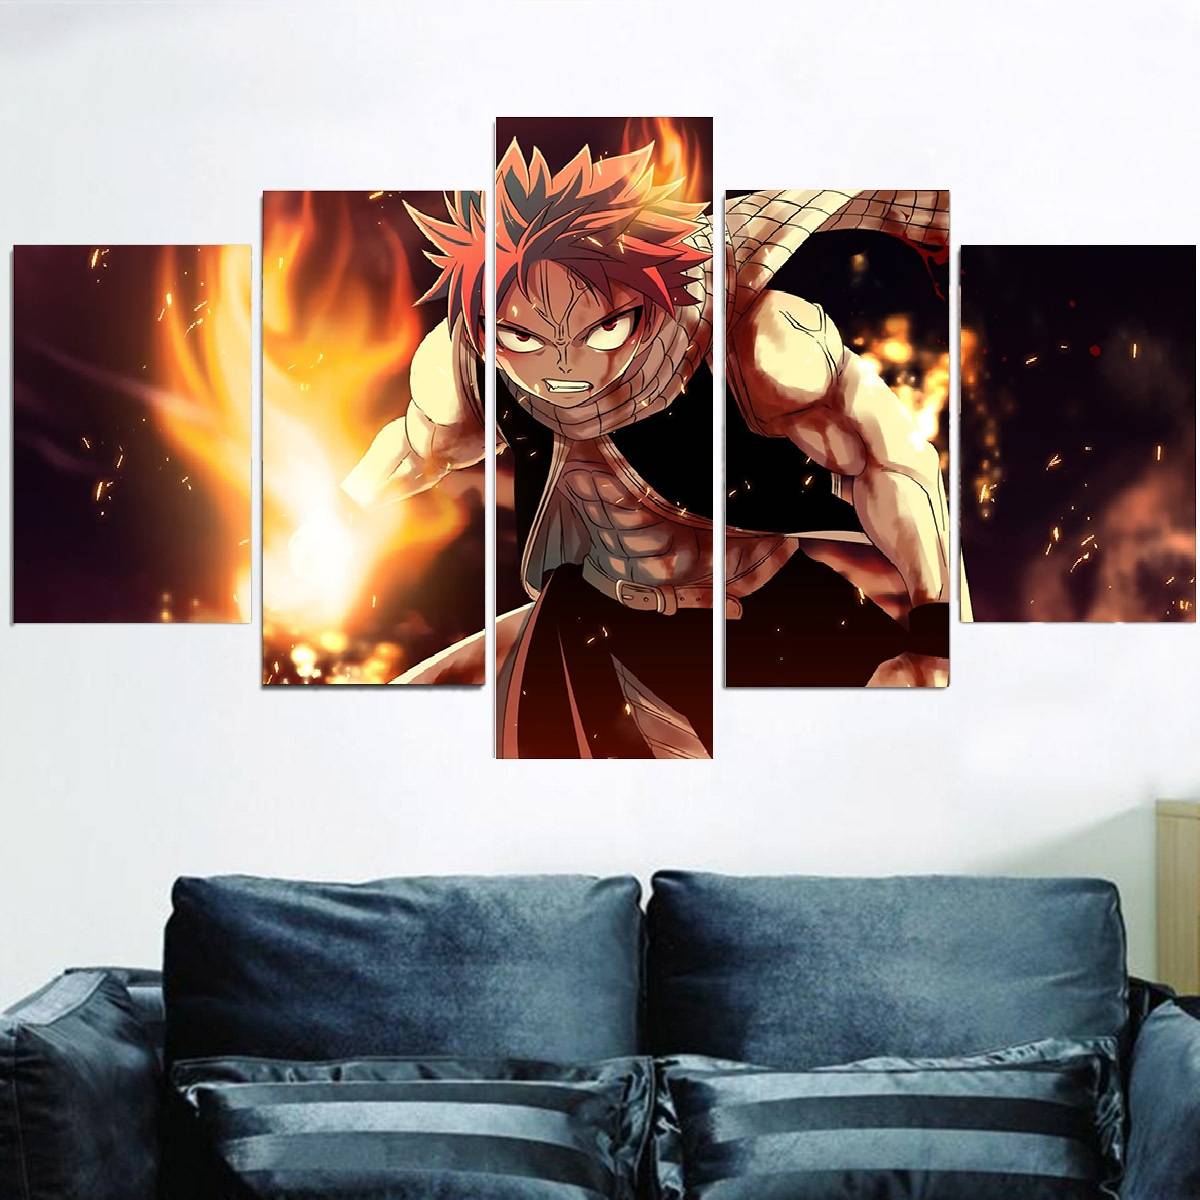 

5pcs/set Unframed Fairy Tail Natsu Fire Dragon Slayers HD Print On Canvas Wall Art Painting For Living Room Decor